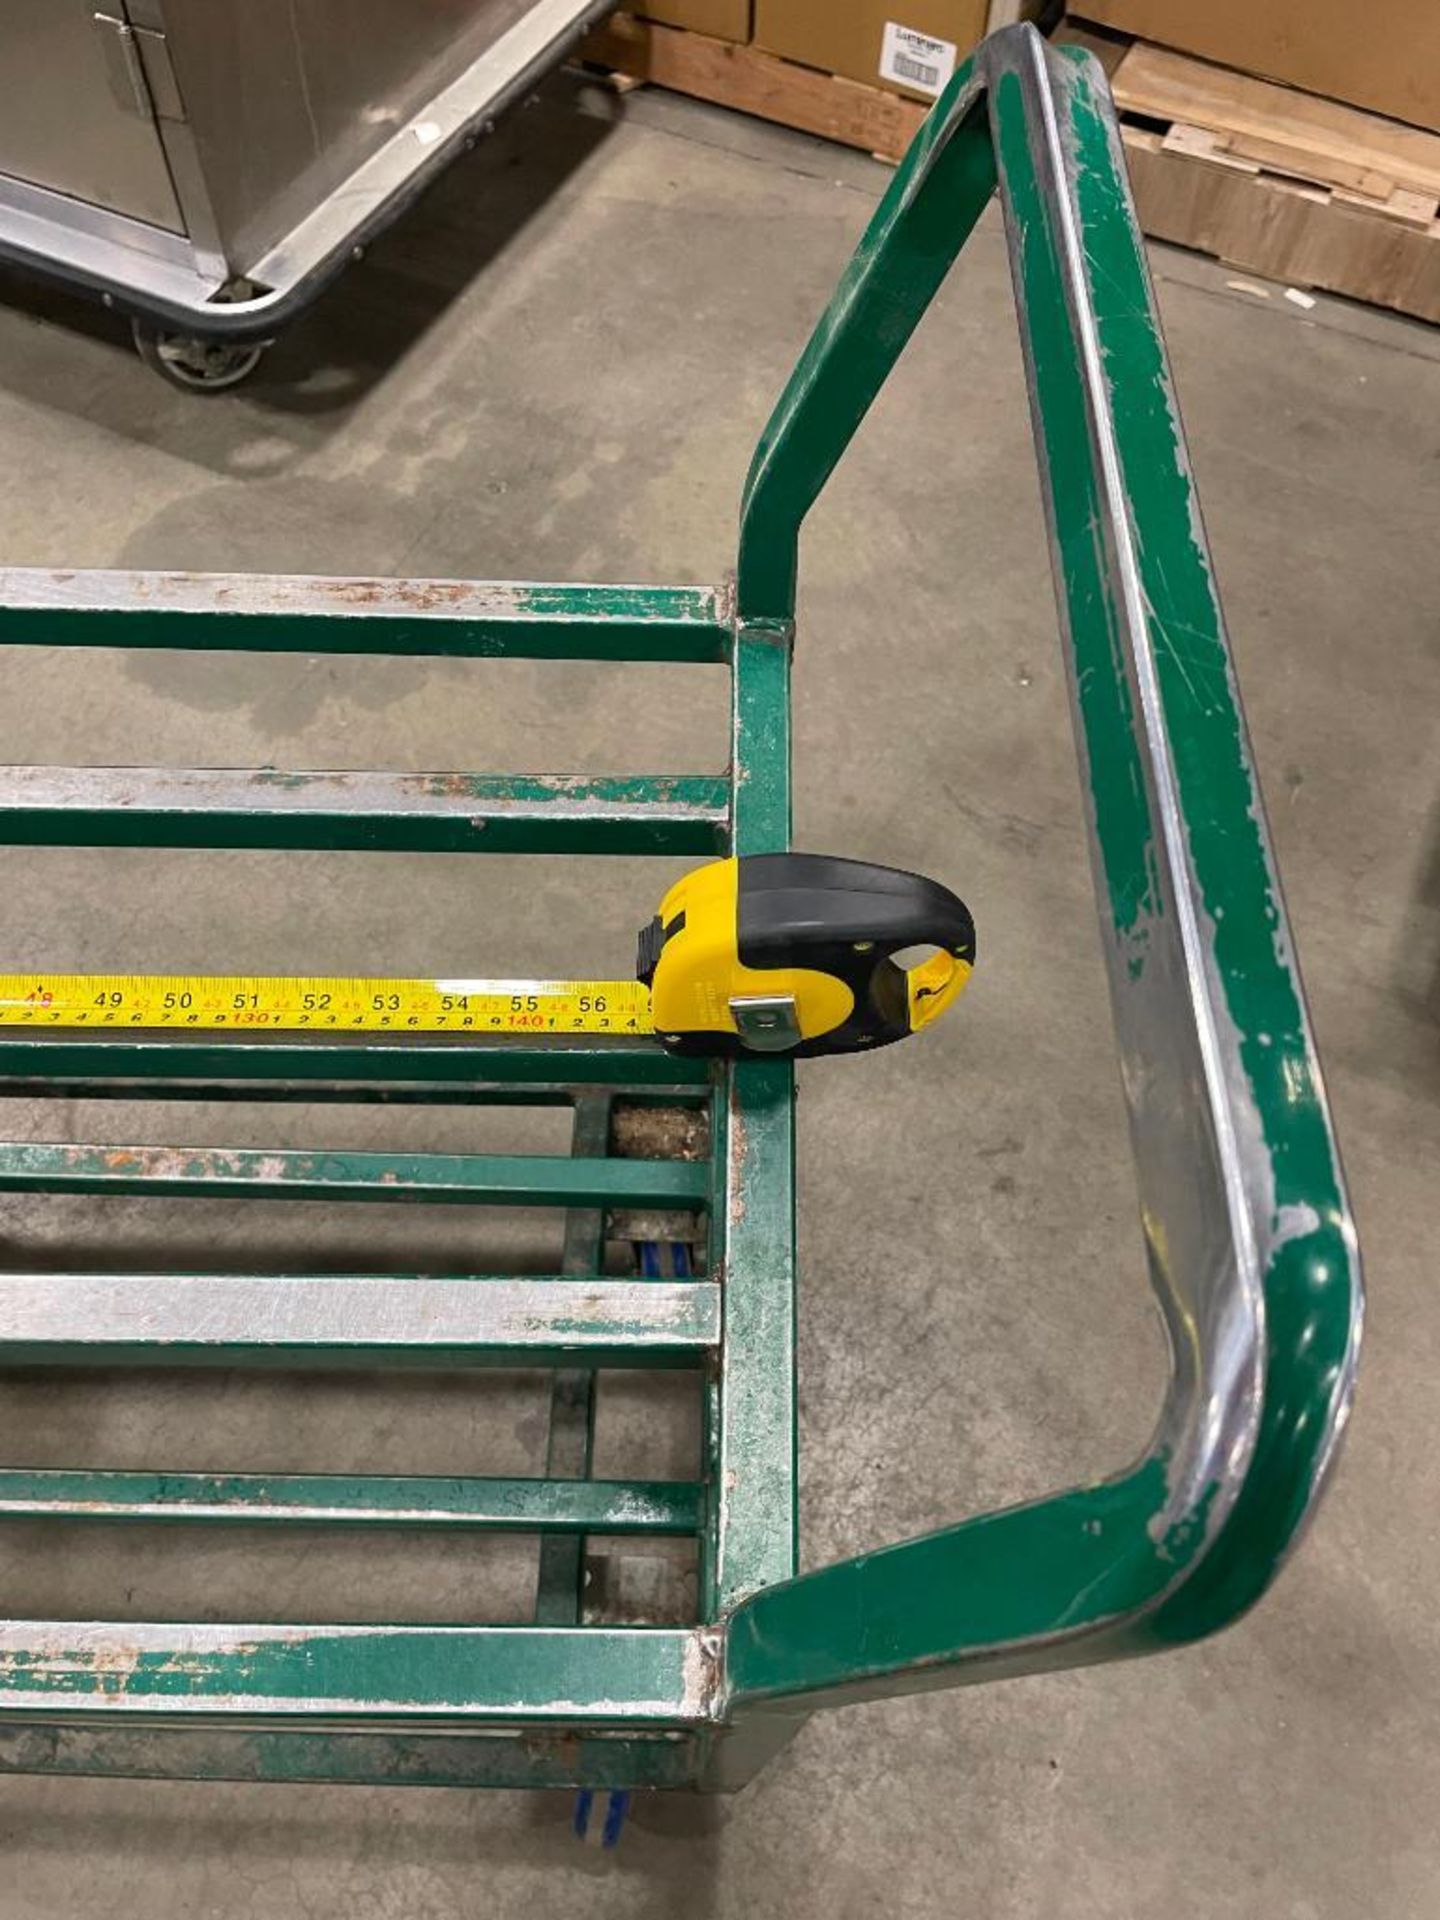 2 TIER GREEN STEEL WAREHOUSE STOCKING CART - Image 3 of 3